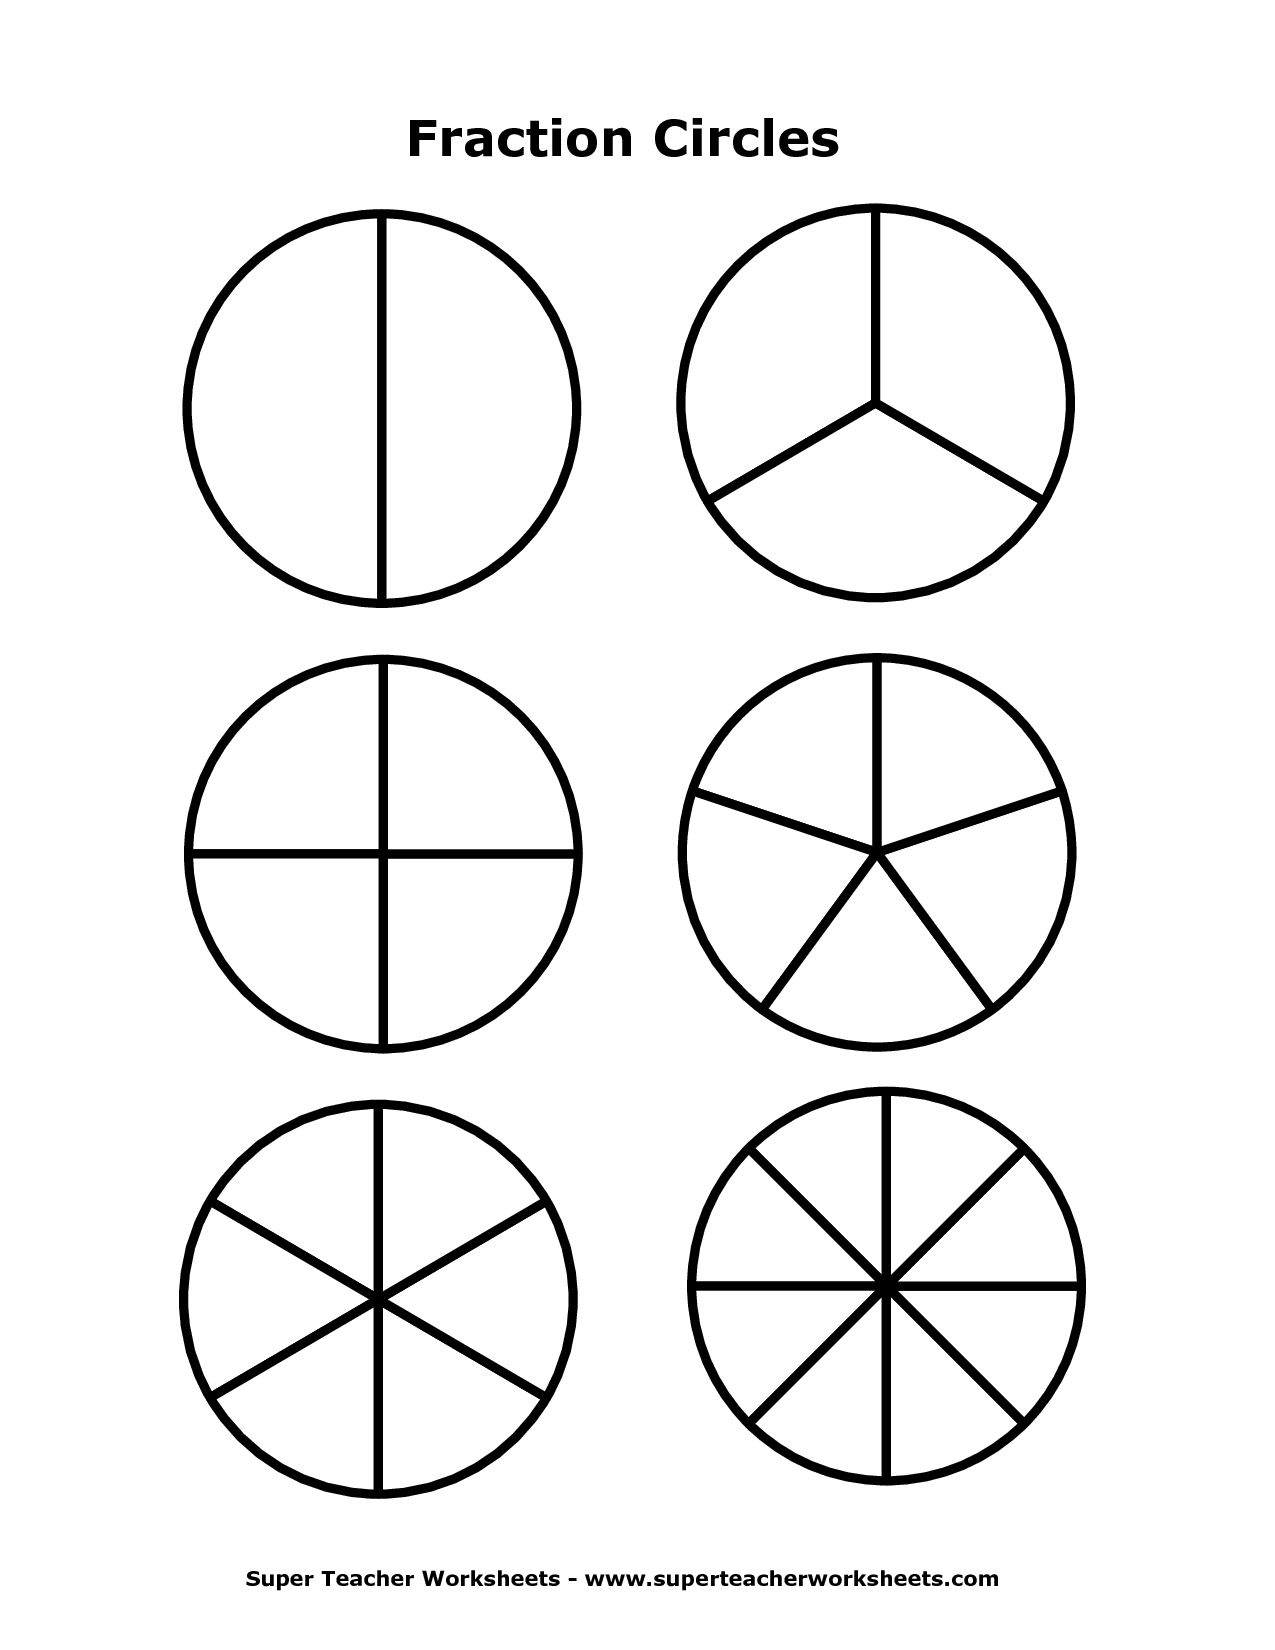 Images Of Fraction Circles - Google Search | Teaching Ideas - Free Printable Blank Fraction Circles